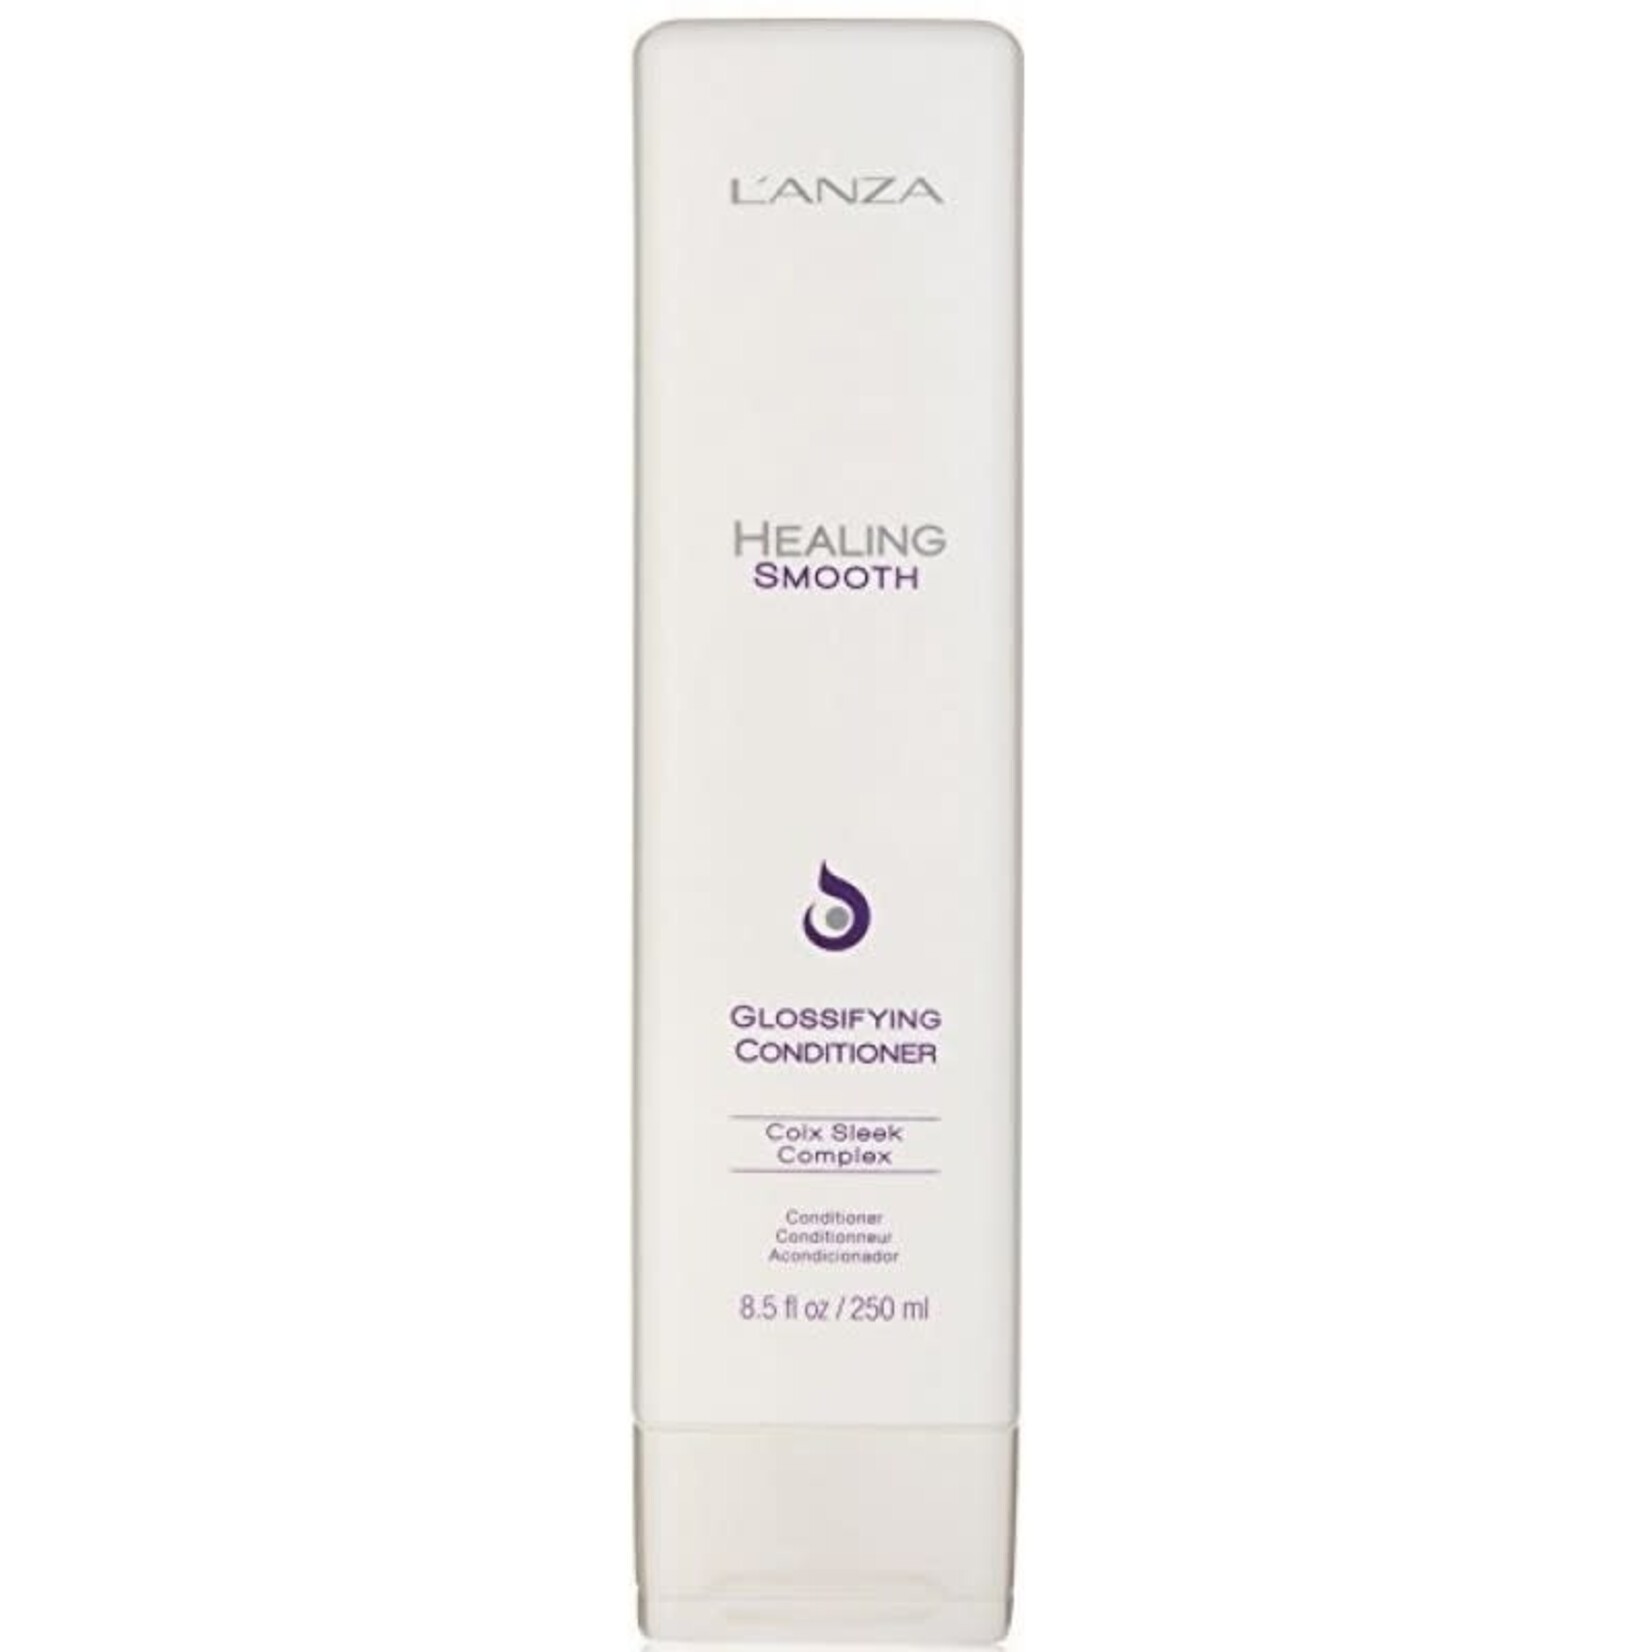 L'Anza L'Anza - Healing Smooth - Glossifying Conditioner 250ml